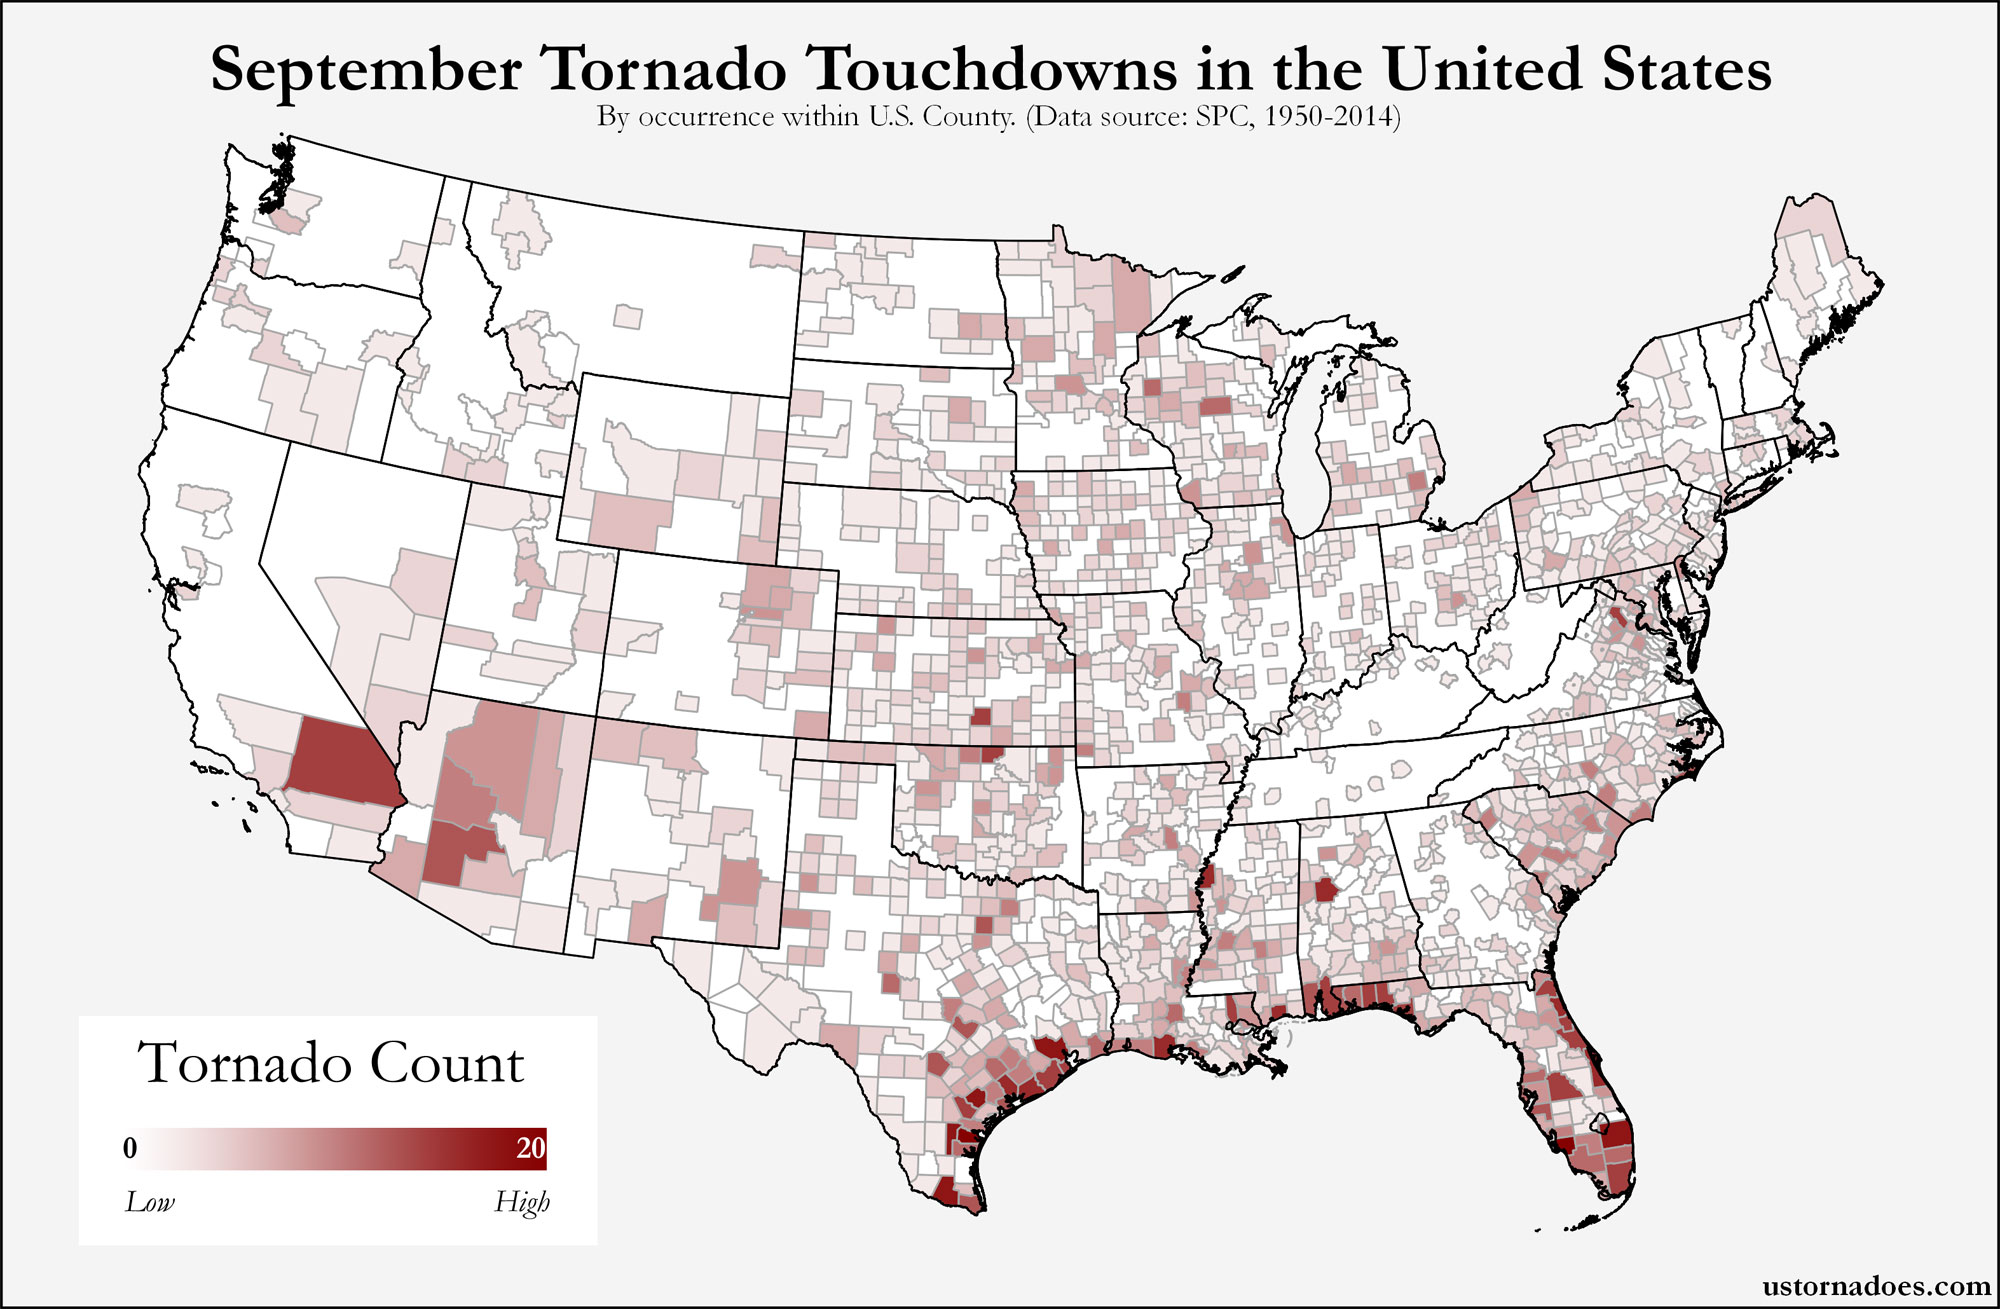 Here’s where tornadoes typically form in September across the United States